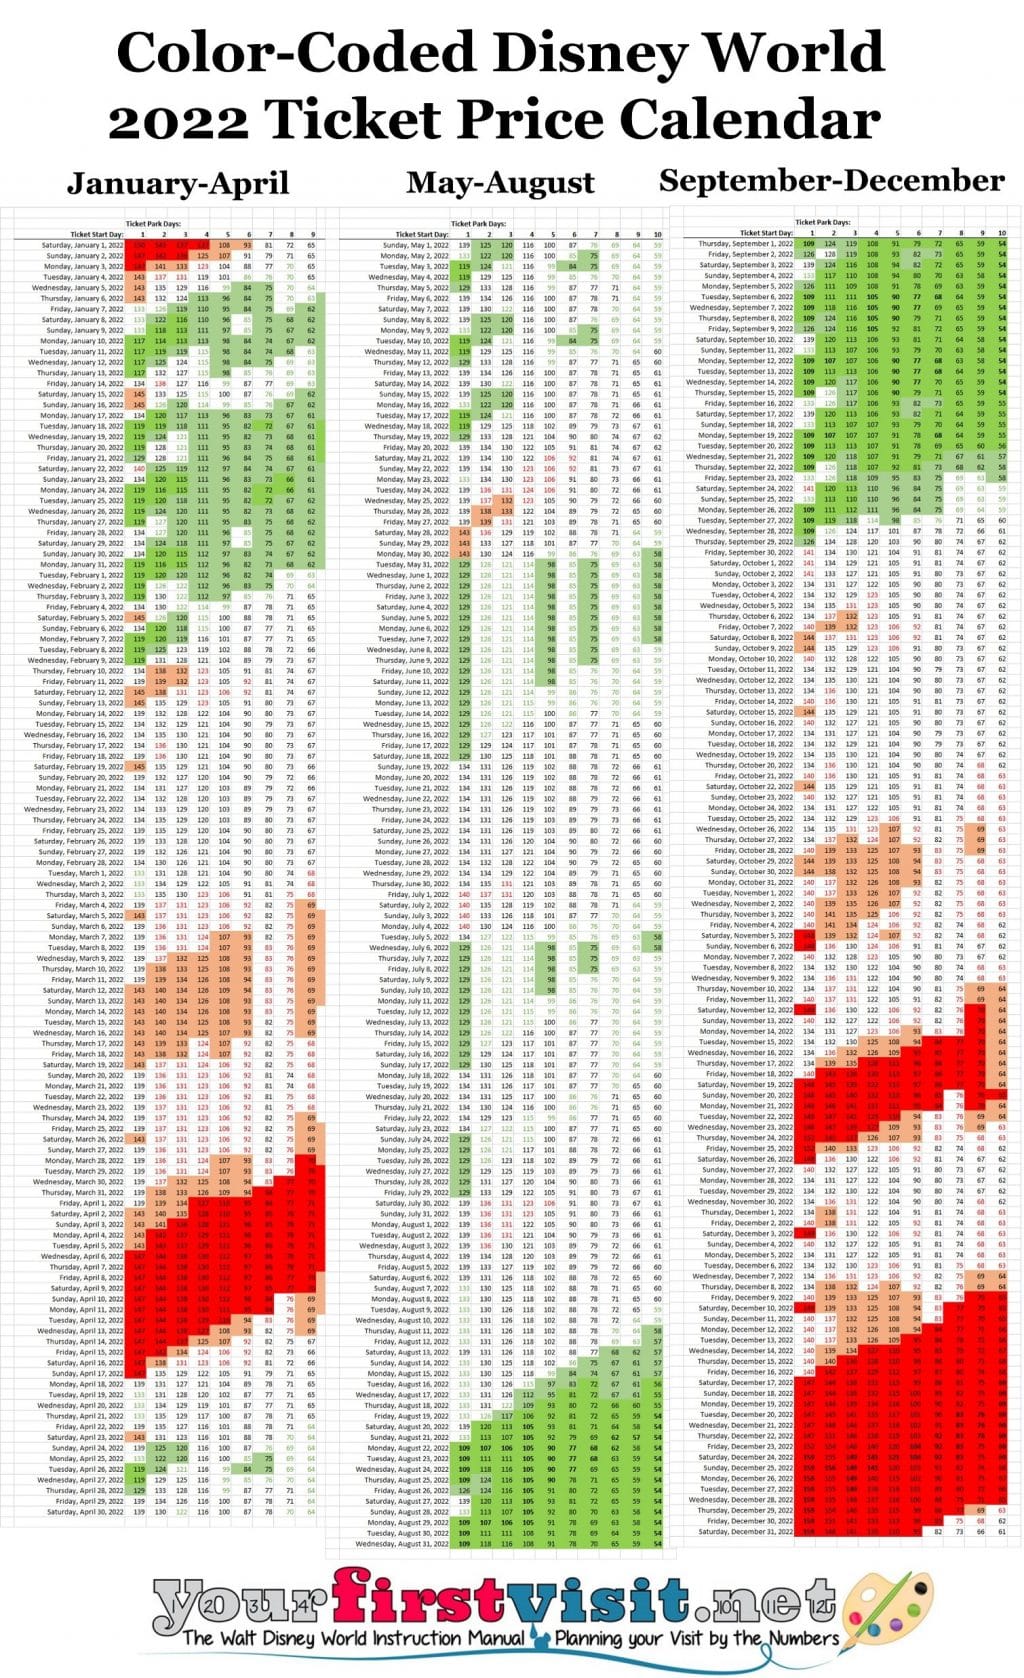 Magic Kingdom Crowd Calendar 2022 Disney World 2022 Ticket Prices In A Color-Coded Calendar -  Yourfirstvisit.net